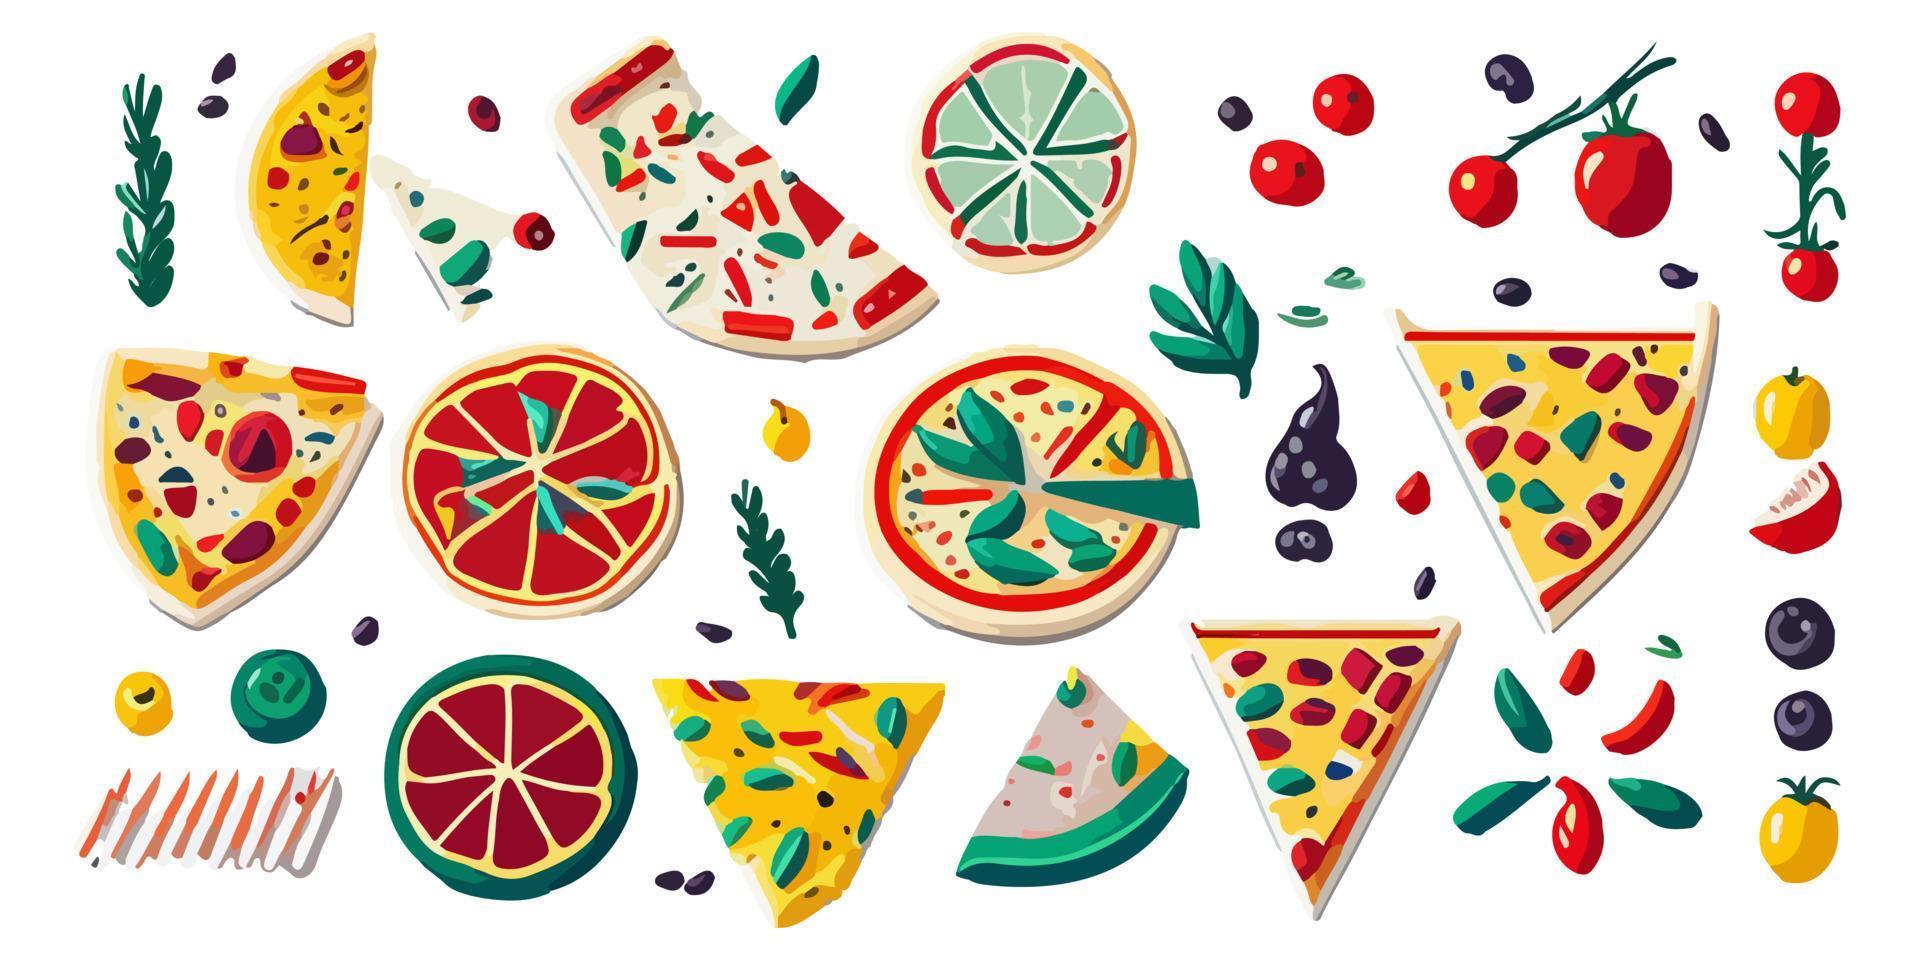 Tasty Pizza with Olives and Tomatoes, Flat Vector Design